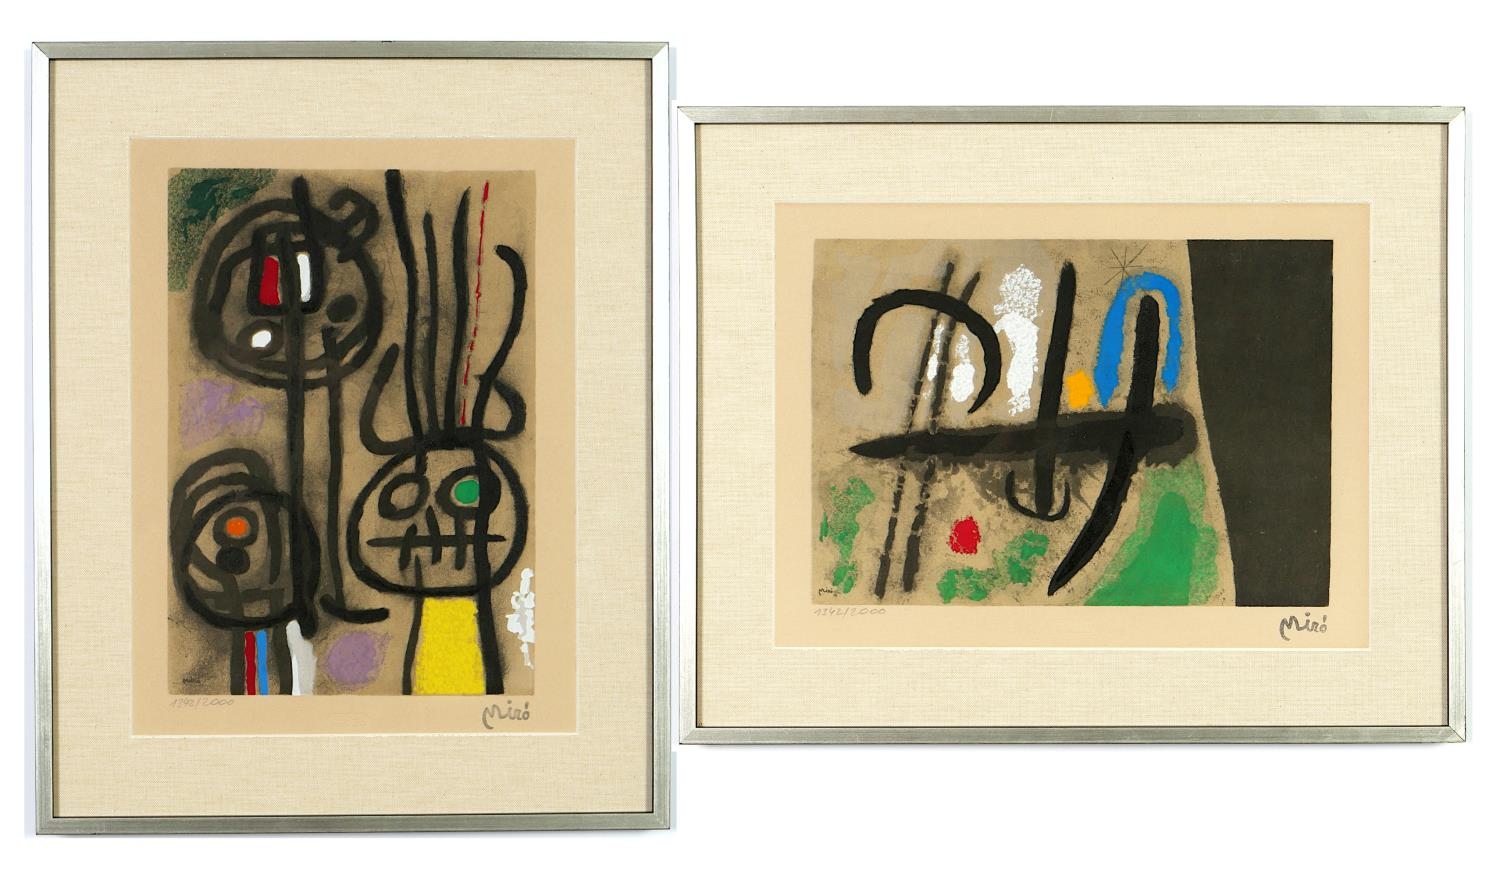 JOAN MIRO, Personnages, a pair, numbered limited edition pochoir, stamped signature, embossed